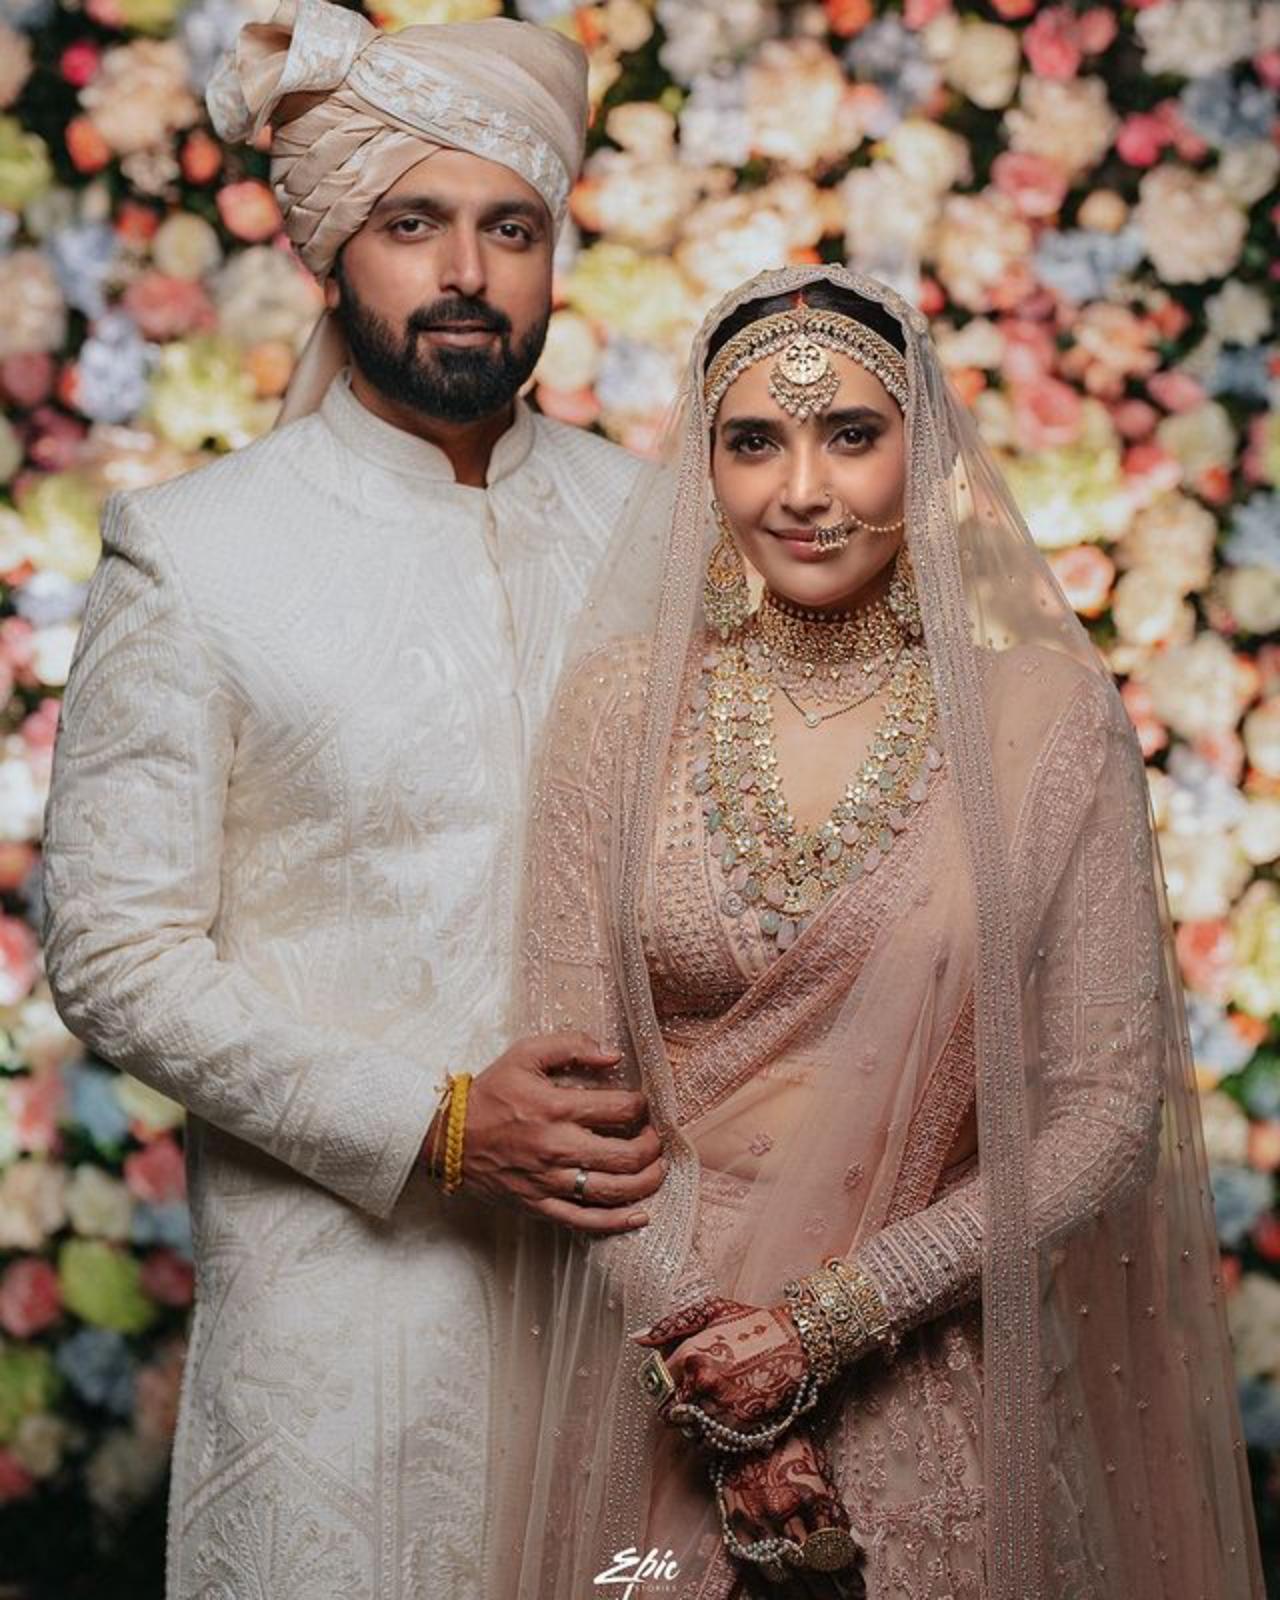 Karishma's wedding was an intimate affair. The couple opted for pastel coloured matching outfits